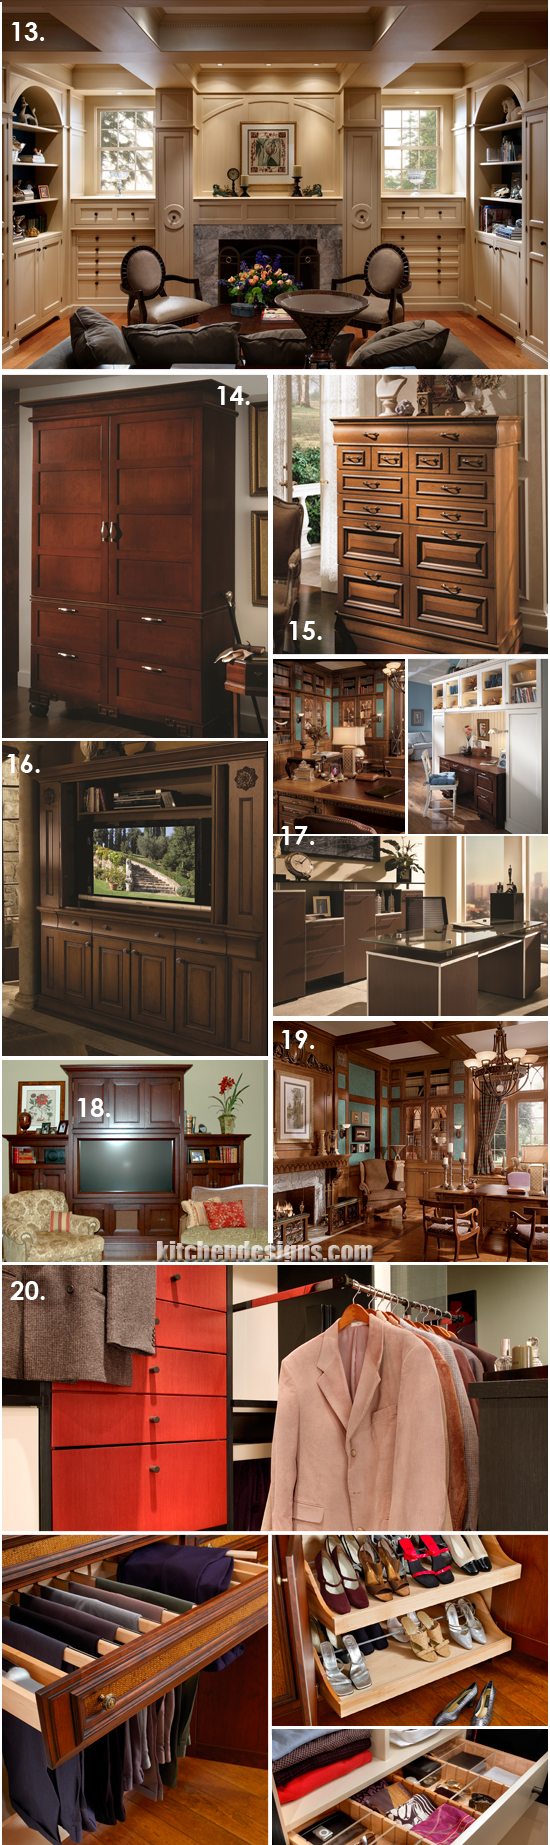 Other room designs in custom millwork Wood Mode fine custom cabinetry for the library, bar, bathroom at Kitchen Designs by Ken Kelly Long Island showroom